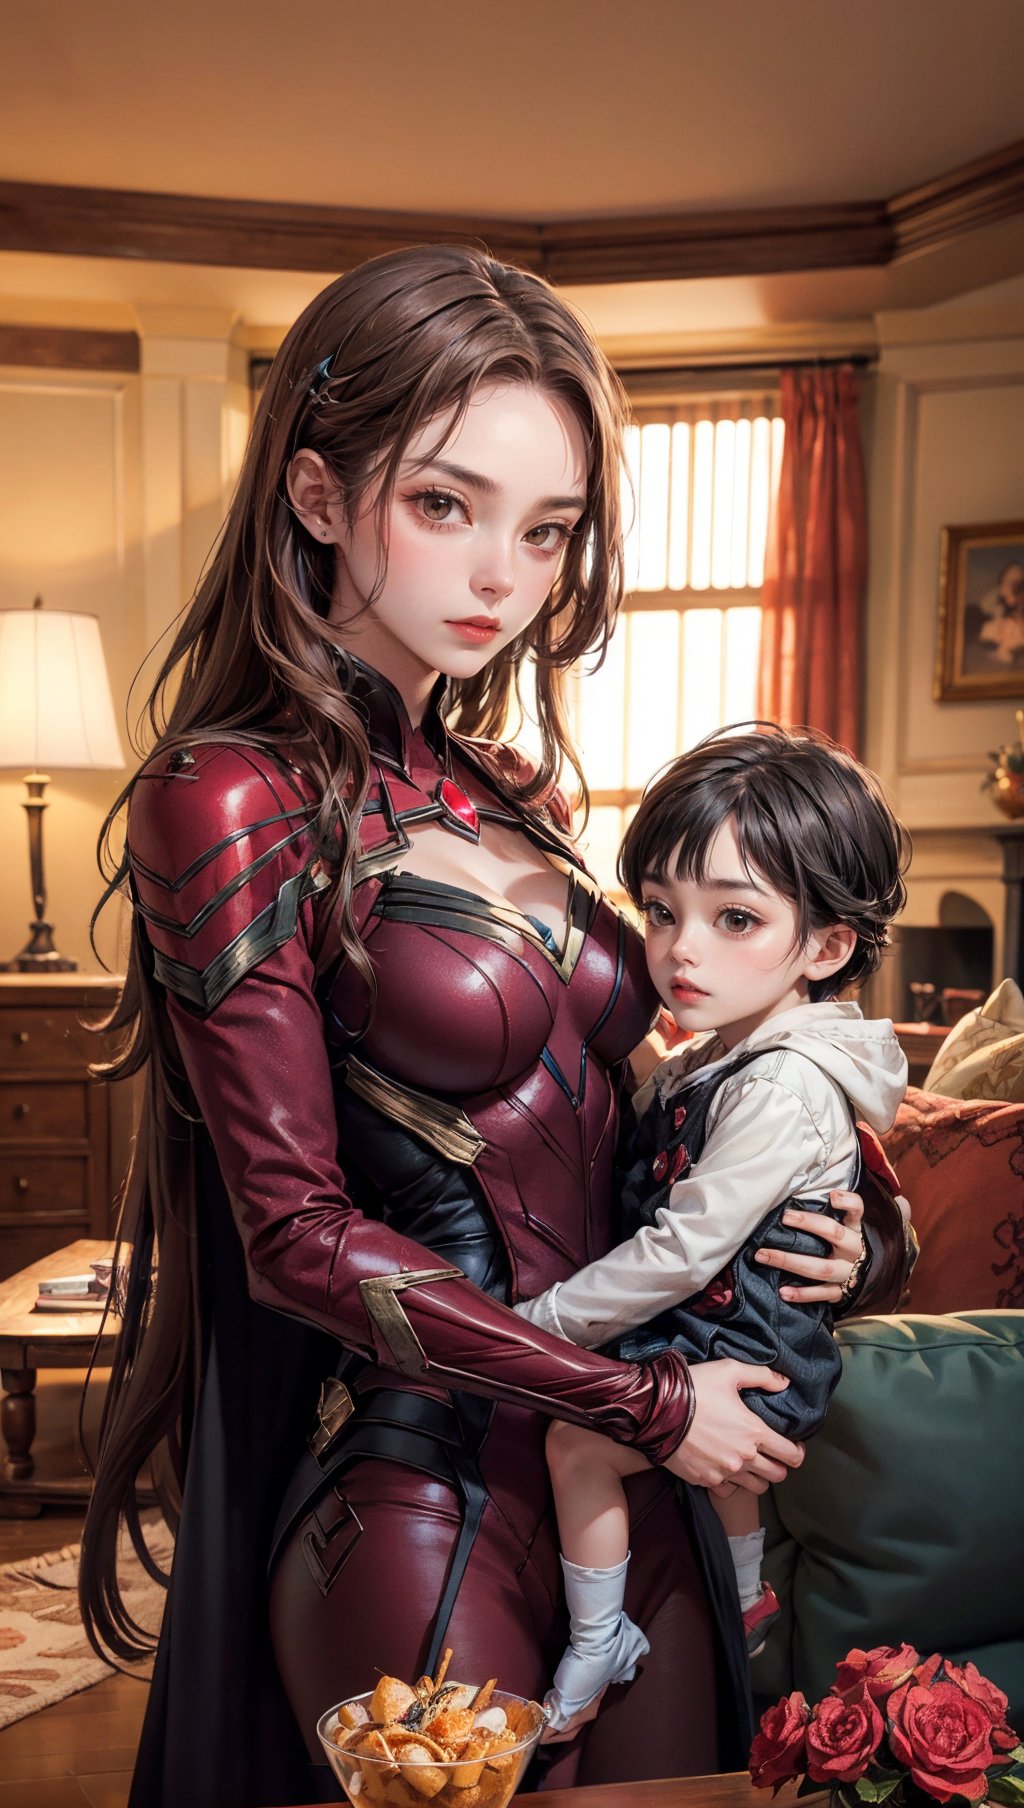 Subject: A photorealistic portrayal of Scarlet Witch as a caring and attentive babysitter, engaging with a group of children in a cozy and inviting living room.

Type of Image: Photorealistic digital illustration.

Art Styles: Realism and heartwarming family photography.

Art Inspirations: High-quality portrait photography of families and children, candid and genuine moments, and Scarlet Witch's nurturing side.

Environment: Indoor, in a warm and comfortable living room filled with toys and playful decor, creating a welcoming atmosphere.

Camera Shot Type: Candid shot.

Camera Lens: 70mm short telephoto lens.

View: Front view capturing Scarlet Witch's warm smile as she interacts with the children.

Render Style: Highly detailed and hyper-realistic, capturing the textures of Scarlet Witch's costume, the expressions of the children, and the cozy ambiance.

Lighting: Soft and natural light, creating a warm and inviting glow in the living room.

Color Type: A mix of warm and comforting colors, enhancing the cozy and family-oriented feel of the scene.

Related Information: 8K resolution, ensuring every detail, from Scarlet Witch's caring expression to the children's playful interactions, is exquisitely displayed, perfect for large prints or high-resolution displays.
